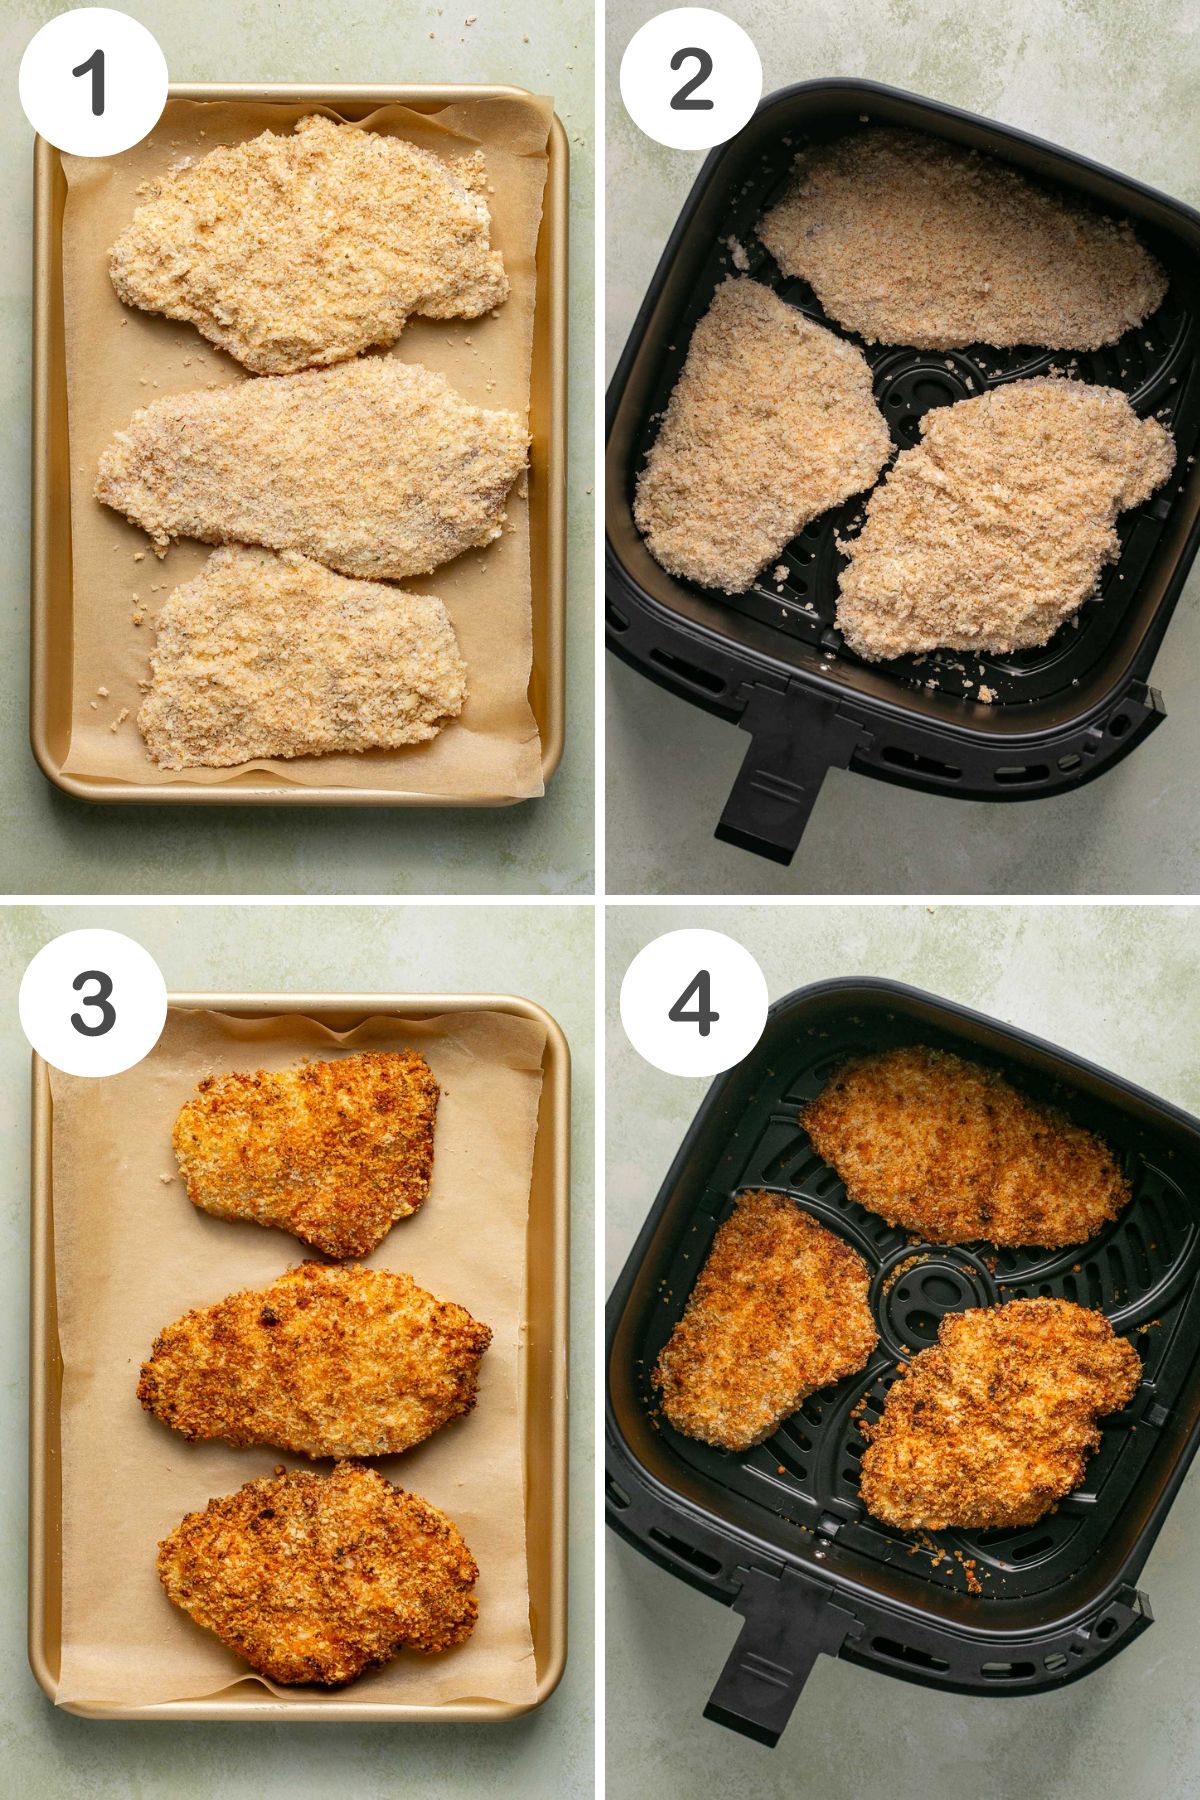 numbered step by step photos showing how to cook the chicken in the oven or the air fryer